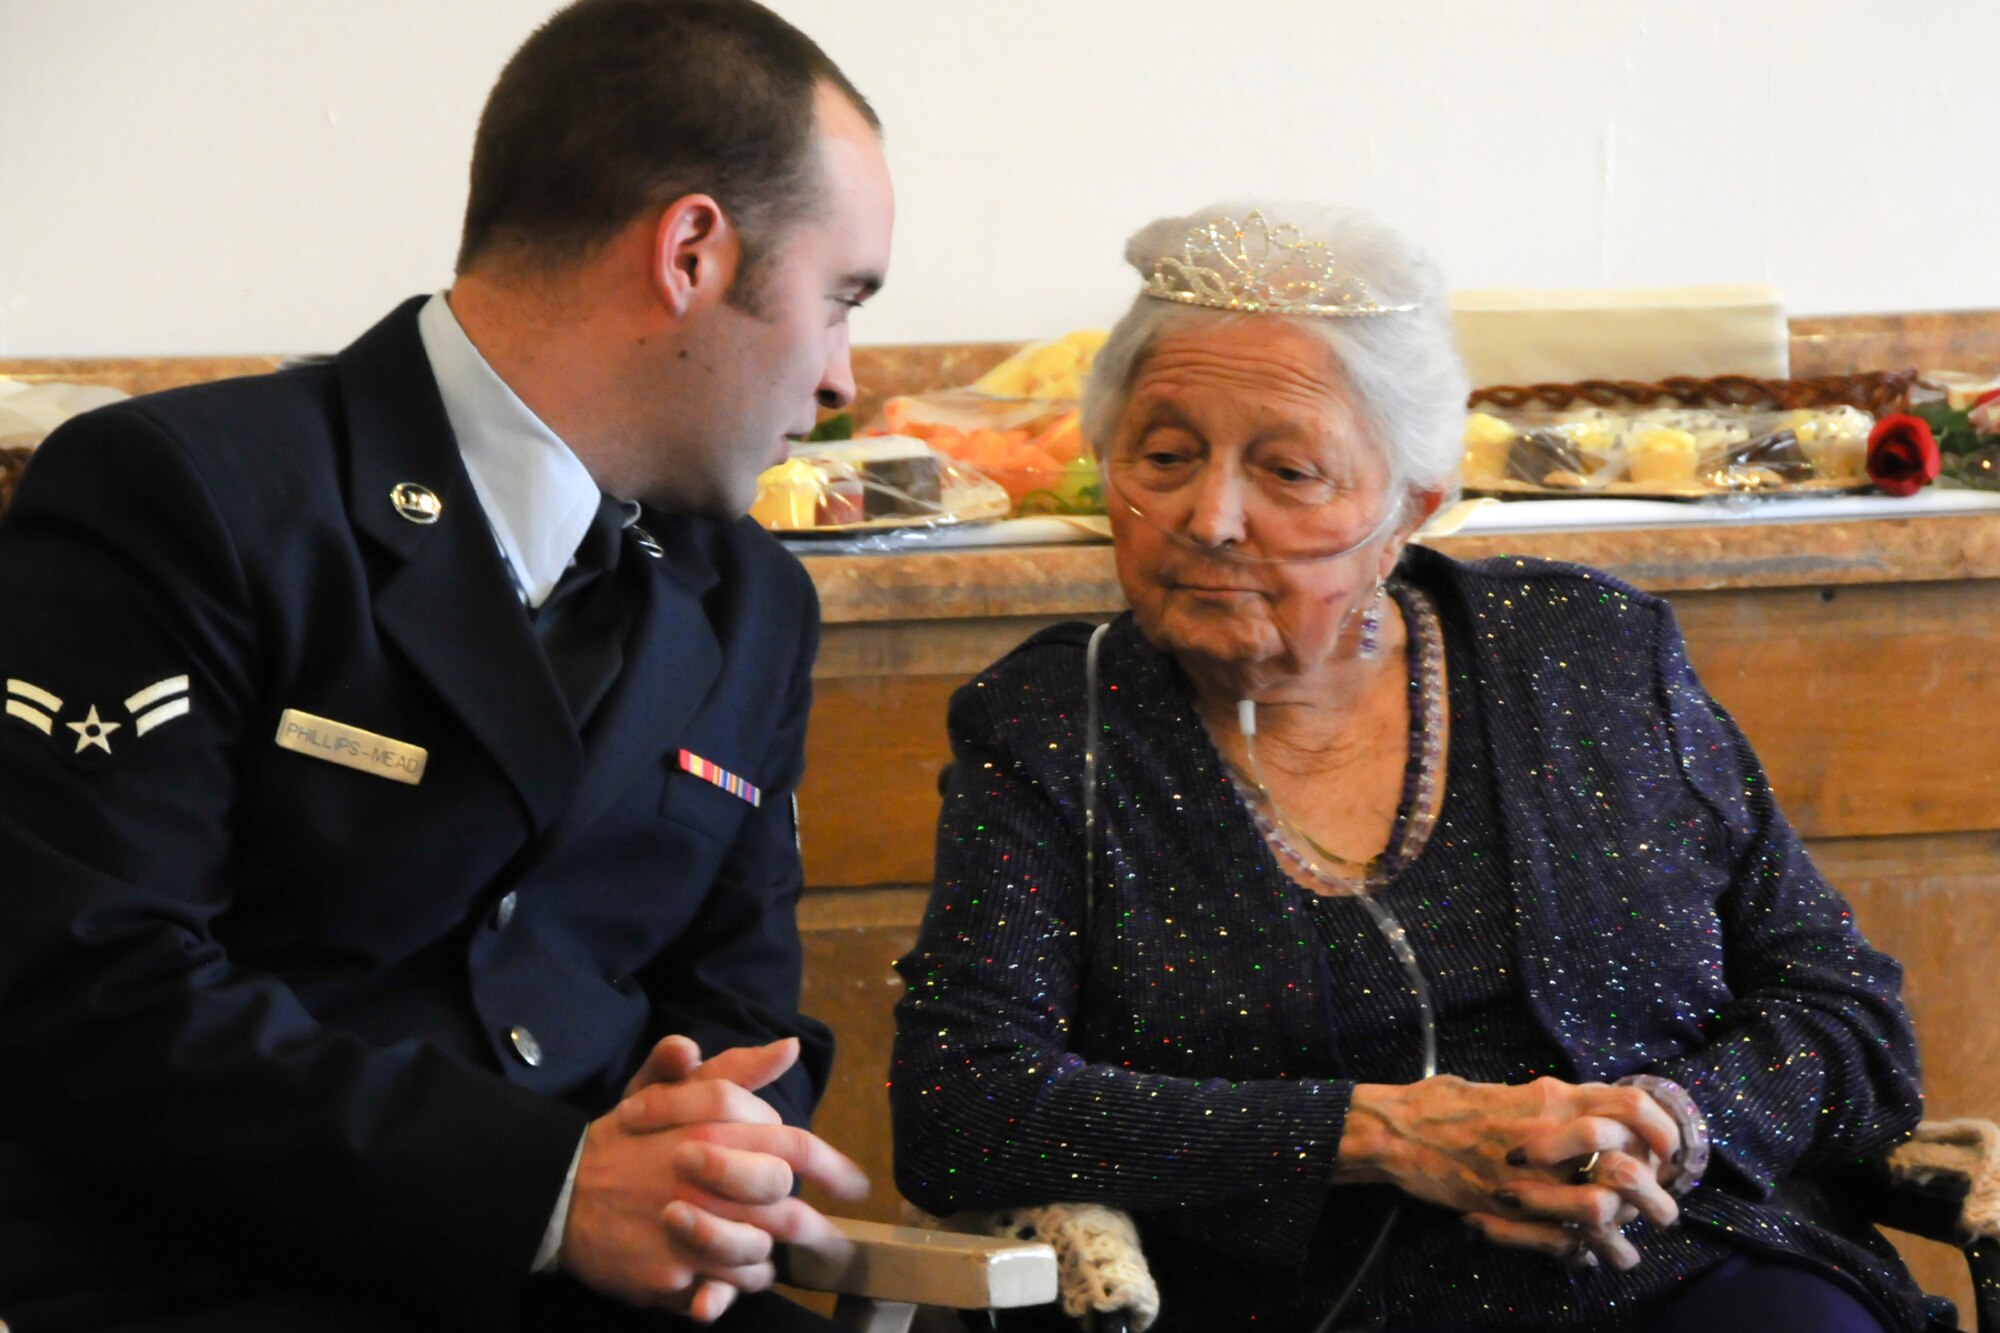 Airman First Class Jesse Phillips-Meade, 270th Air Traffic Control Squadron, talks with Mrs. Jessie Spillane,the 2010 reigning Rose Queen, before the ceremony.  Members of the Oregon Air National Guard volunteered to help with the 2011 Rose Queen Corenation ceremony at Plum Ridge Marquis Care in Klamath Falls, Ore. April 8, 2011. (U.S. Air Force Photo by Tech.Sgt. Jennifer Shirar, RELEASED)